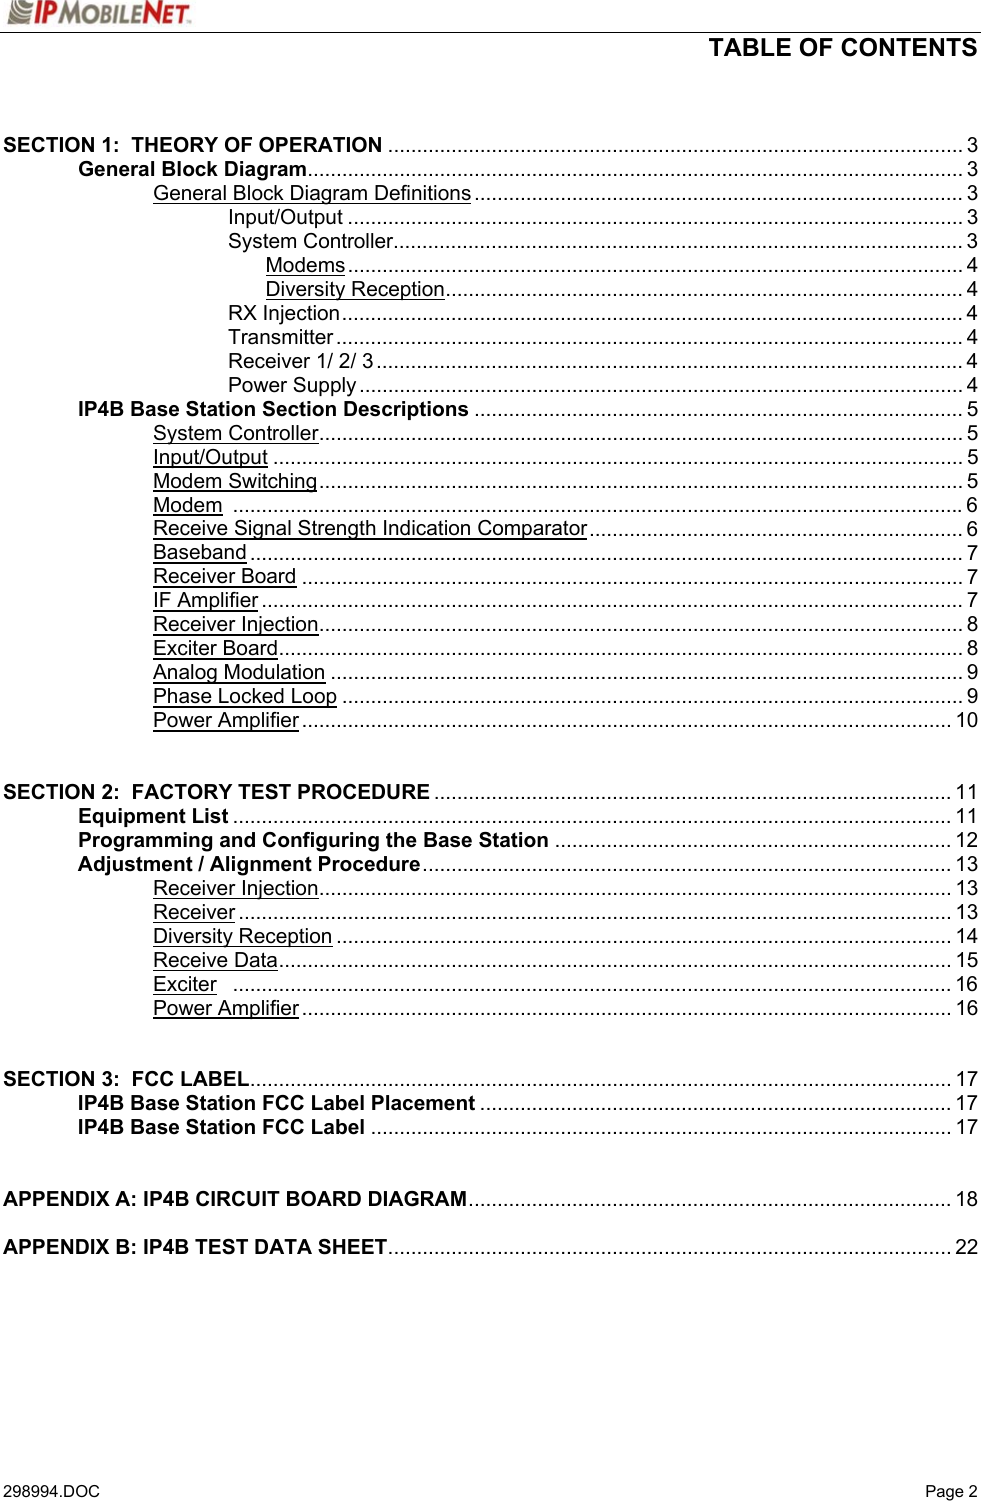  TABLE OF CONTENTS   298994.DOC   Page 2  SECTION 1:  THEORY OF OPERATION .................................................................................................... 3   General Block Diagram.................................................................................................................. 3     General Block Diagram Definitions ..................................................................................... 3    Input/Output ........................................................................................................... 3    System Controller................................................................................................... 3     Modems........................................................................................................... 4     Diversity Reception.......................................................................................... 4    RX Injection............................................................................................................ 4    Transmitter ............................................................................................................. 4    Receiver 1/ 2/ 3...................................................................................................... 4    Power Supply......................................................................................................... 4  IP4B Base Station Section Descriptions ..................................................................................... 5   System Controller................................................................................................................ 5   Input/Output ........................................................................................................................ 5   Modem Switching................................................................................................................ 5   Modem ...............................................................................................................................6     Receive Signal Strength Indication Comparator................................................................. 6   Baseband ............................................................................................................................ 7   Receiver Board ................................................................................................................... 7   IF Amplifier .......................................................................................................................... 7   Receiver Injection................................................................................................................ 8   Exciter Board....................................................................................................................... 8   Analog Modulation .............................................................................................................. 9   Phase Locked Loop ............................................................................................................ 9   Power Amplifier................................................................................................................. 10   SECTION 2:  FACTORY TEST PROCEDURE .......................................................................................... 11  Equipment List ............................................................................................................................. 11  Programming and Configuring the Base Station ..................................................................... 12  Adjustment / Alignment Procedure............................................................................................ 13   Receiver Injection.............................................................................................................. 13   Receiver............................................................................................................................ 13   Diversity Reception ........................................................................................................... 14   Receive Data..................................................................................................................... 15   Exciter ............................................................................................................................. 16   Power Amplifier................................................................................................................. 16   SECTION 3:  FCC LABEL.......................................................................................................................... 17  IP4B Base Station FCC Label Placement .................................................................................. 17  IP4B Base Station FCC Label ..................................................................................................... 17   APPENDIX A: IP4B CIRCUIT BOARD DIAGRAM.................................................................................... 18  APPENDIX B: IP4B TEST DATA SHEET.................................................................................................. 22     